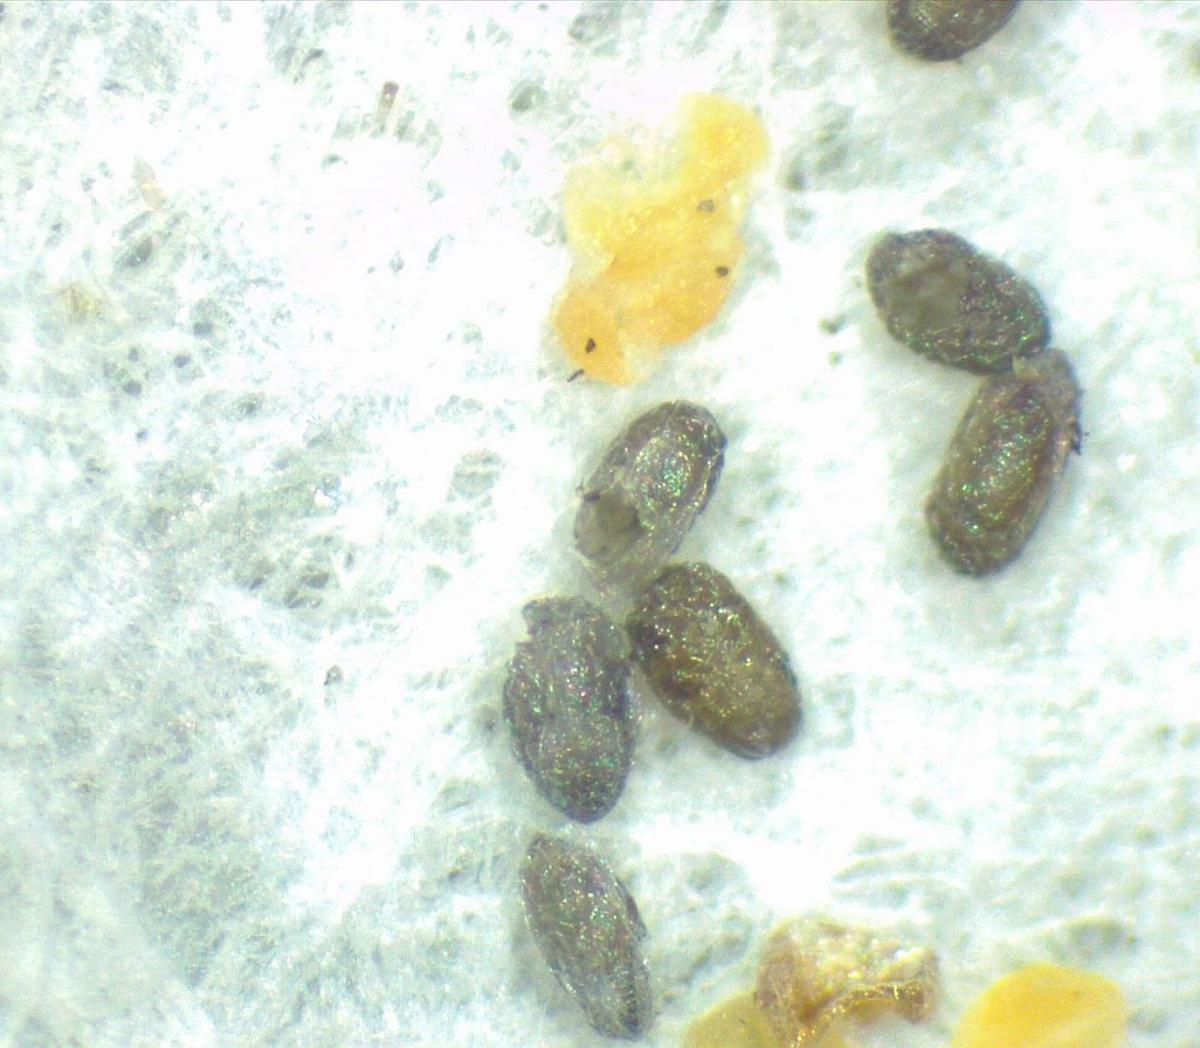 Ephestia eggs from which Trichogramma have emerged after soaking in an herbicide